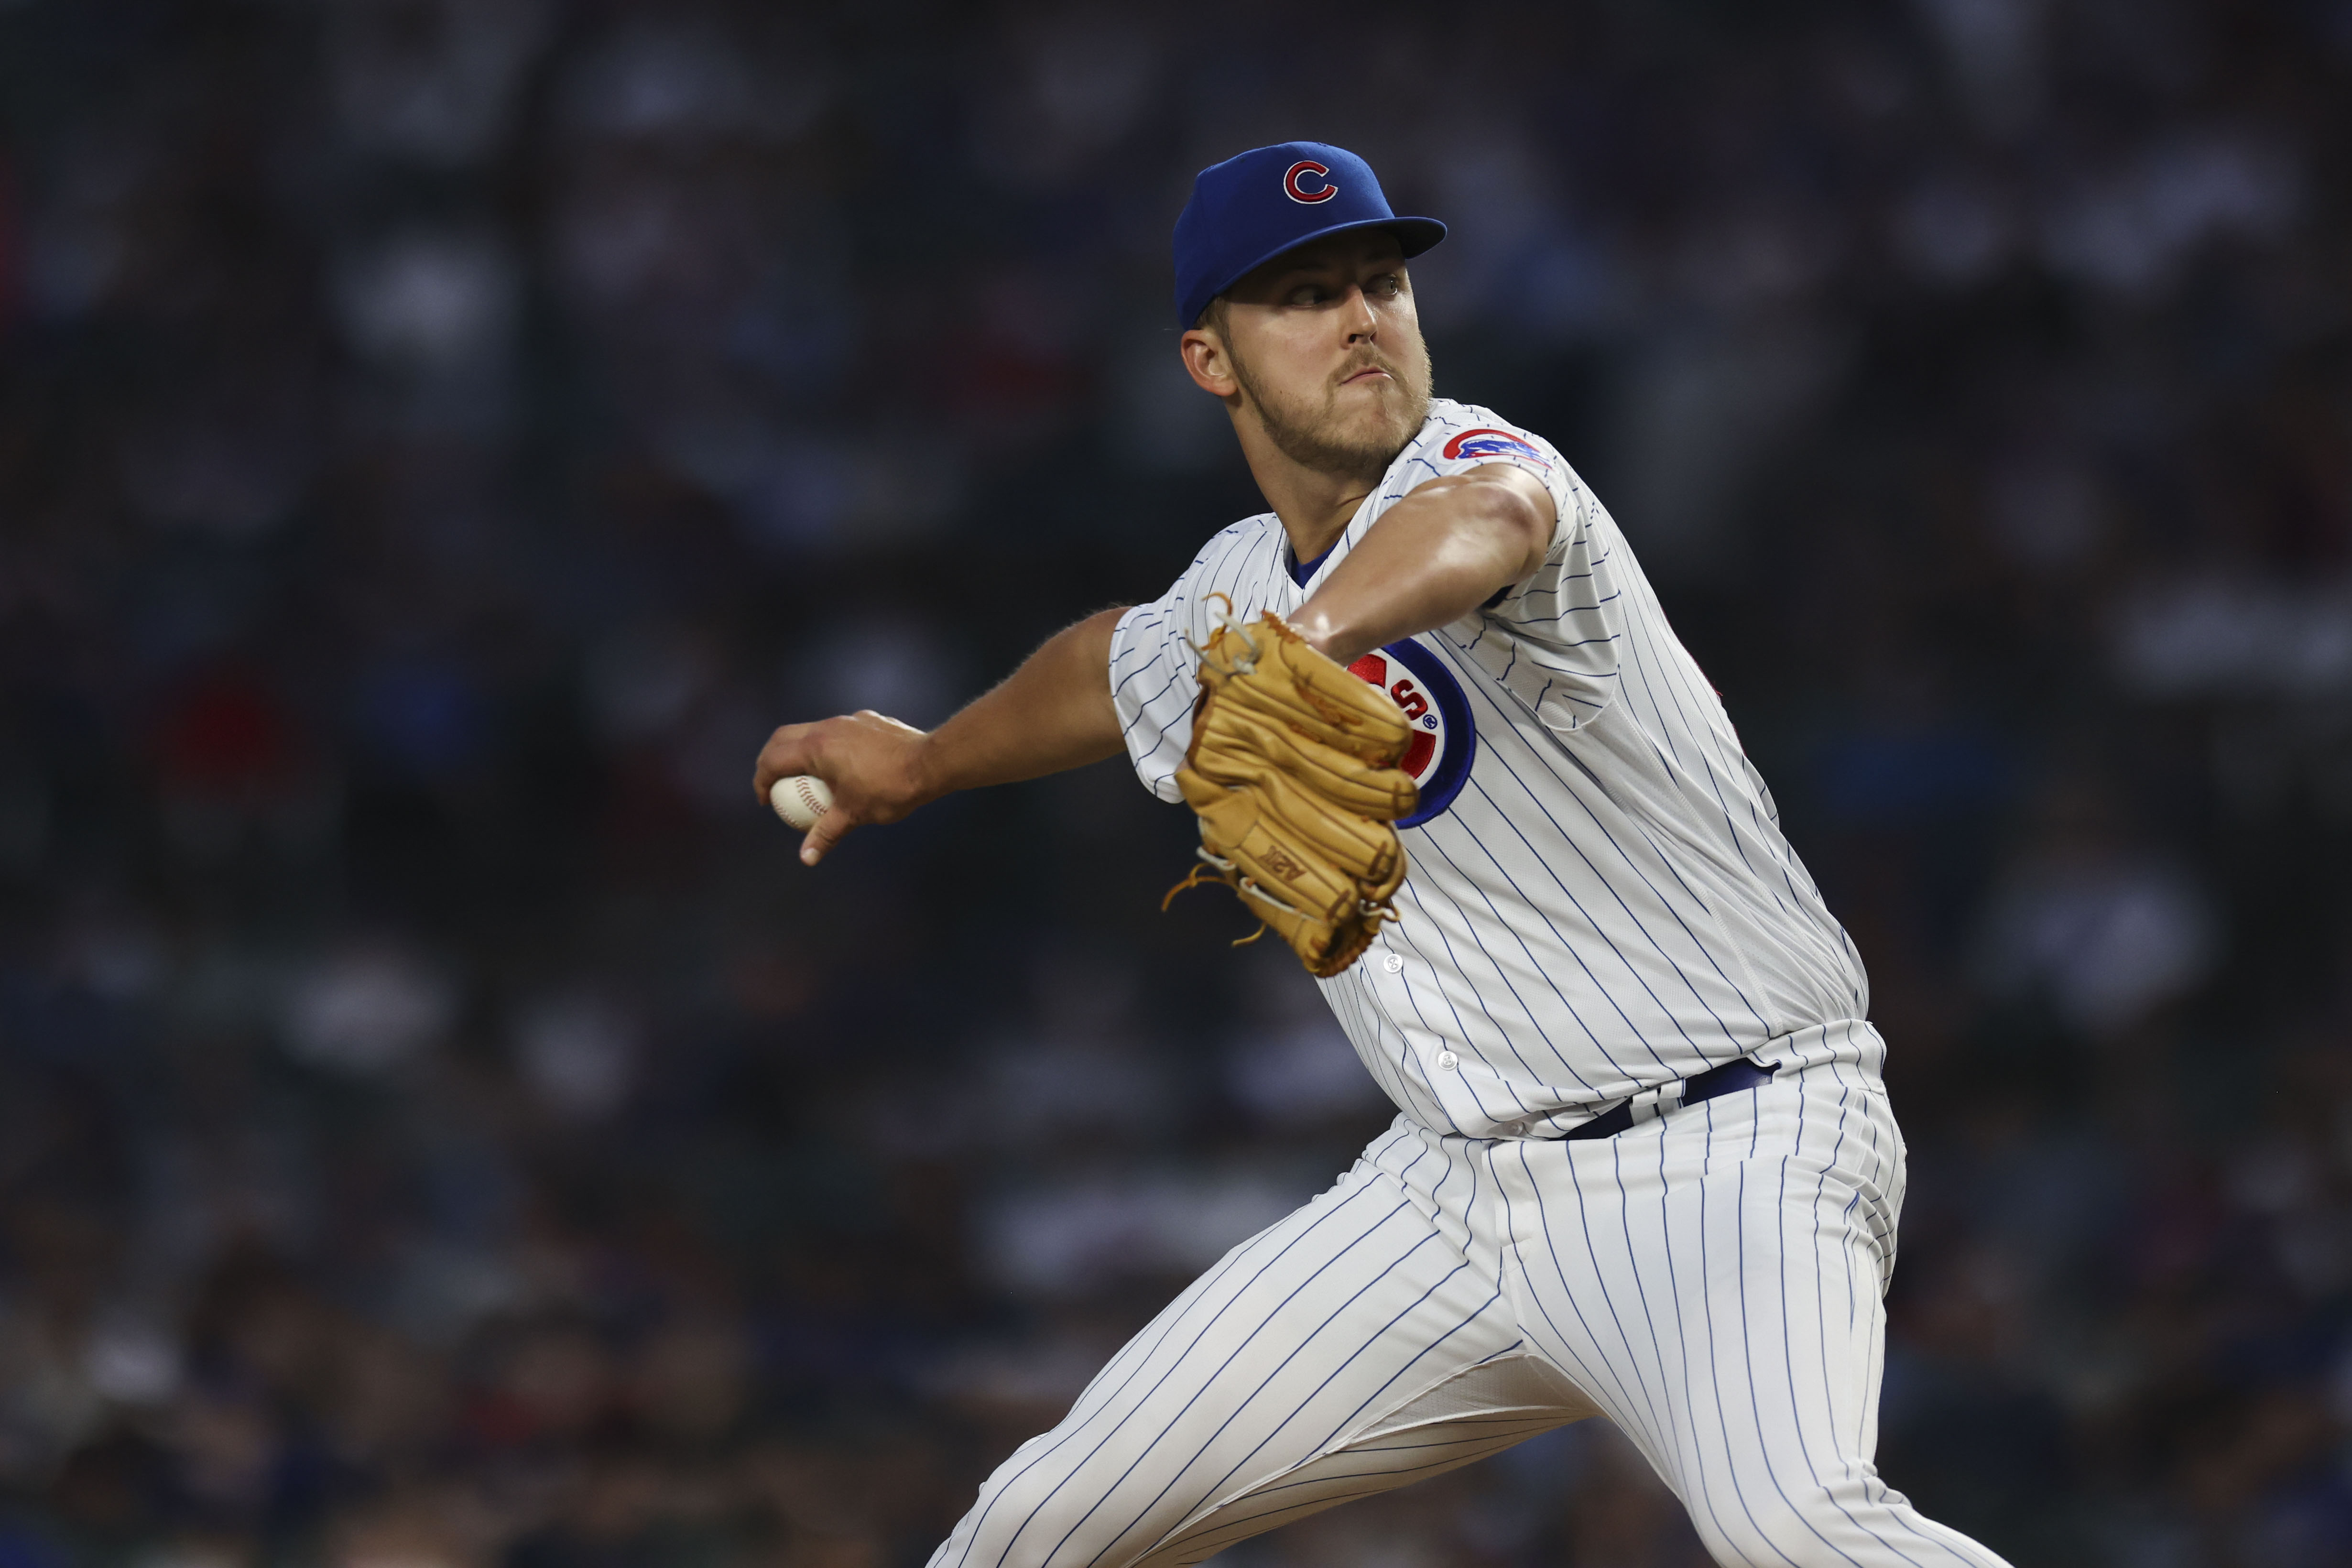 Jameson Taillon Strikes Out 7 in 5 Innings!, Chicago Cubs